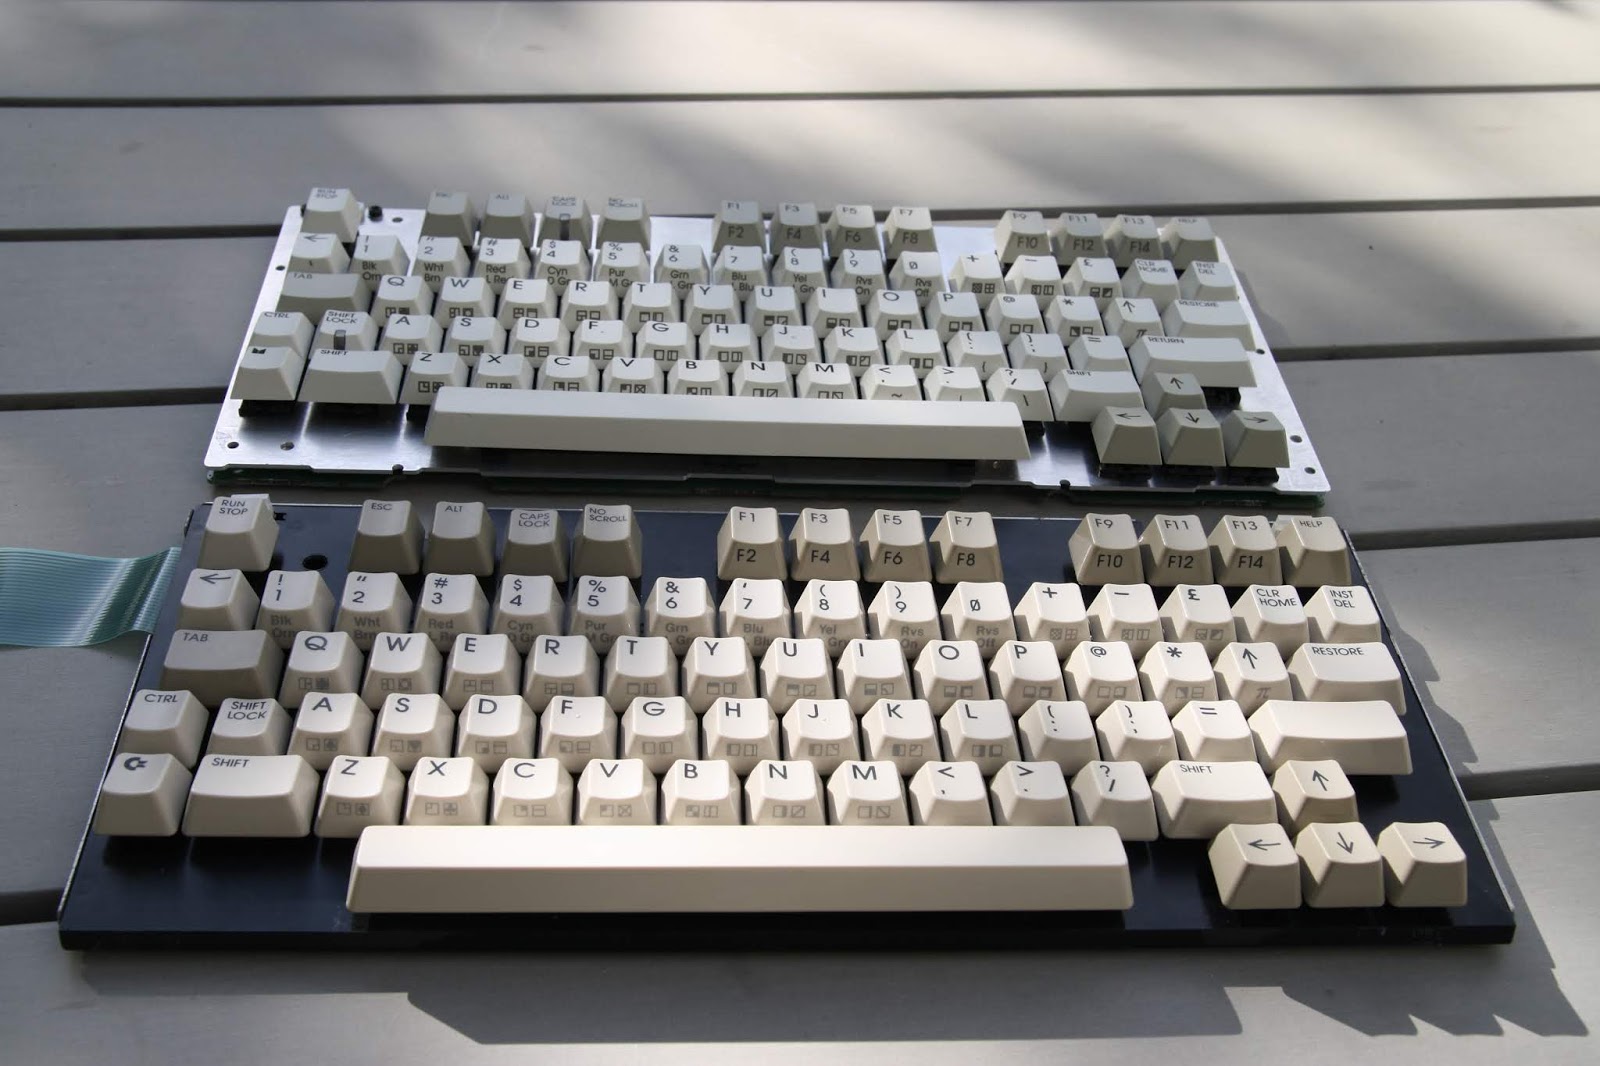 Keyboard prototypes have been manufactured, and they are AMAZING 